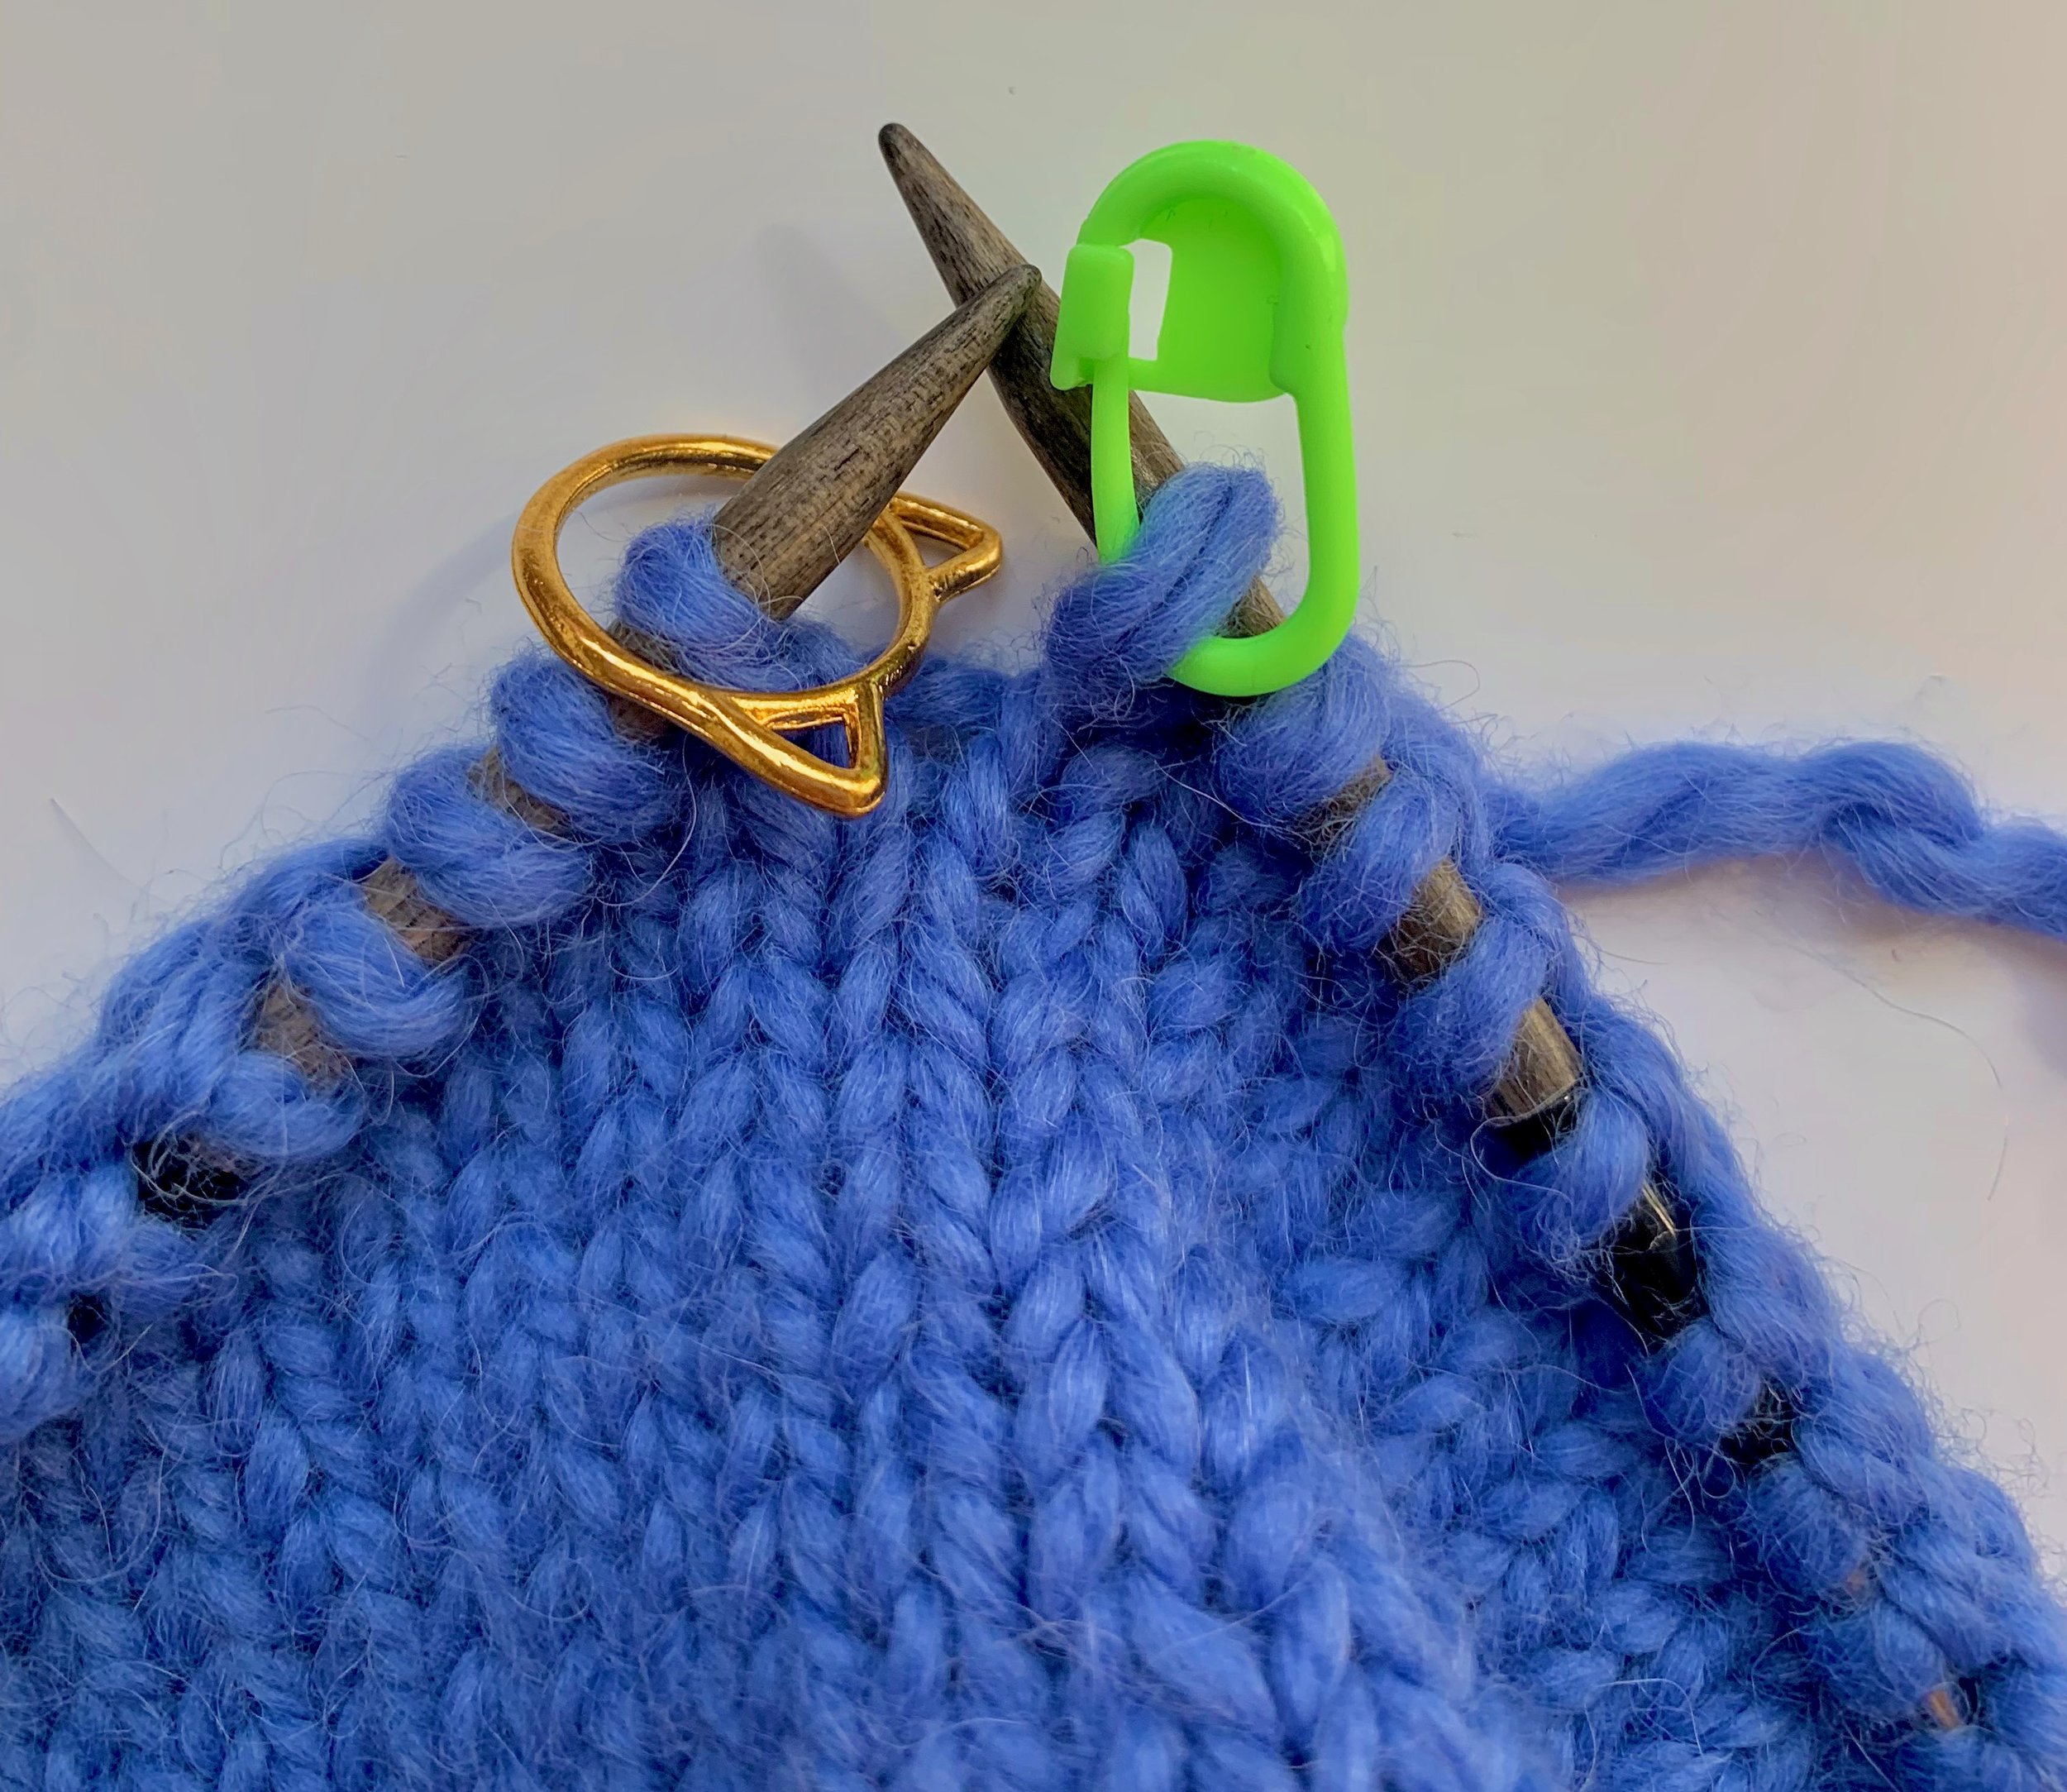 Ideas for Homemade Stitch Markers for Your Knitting Projects